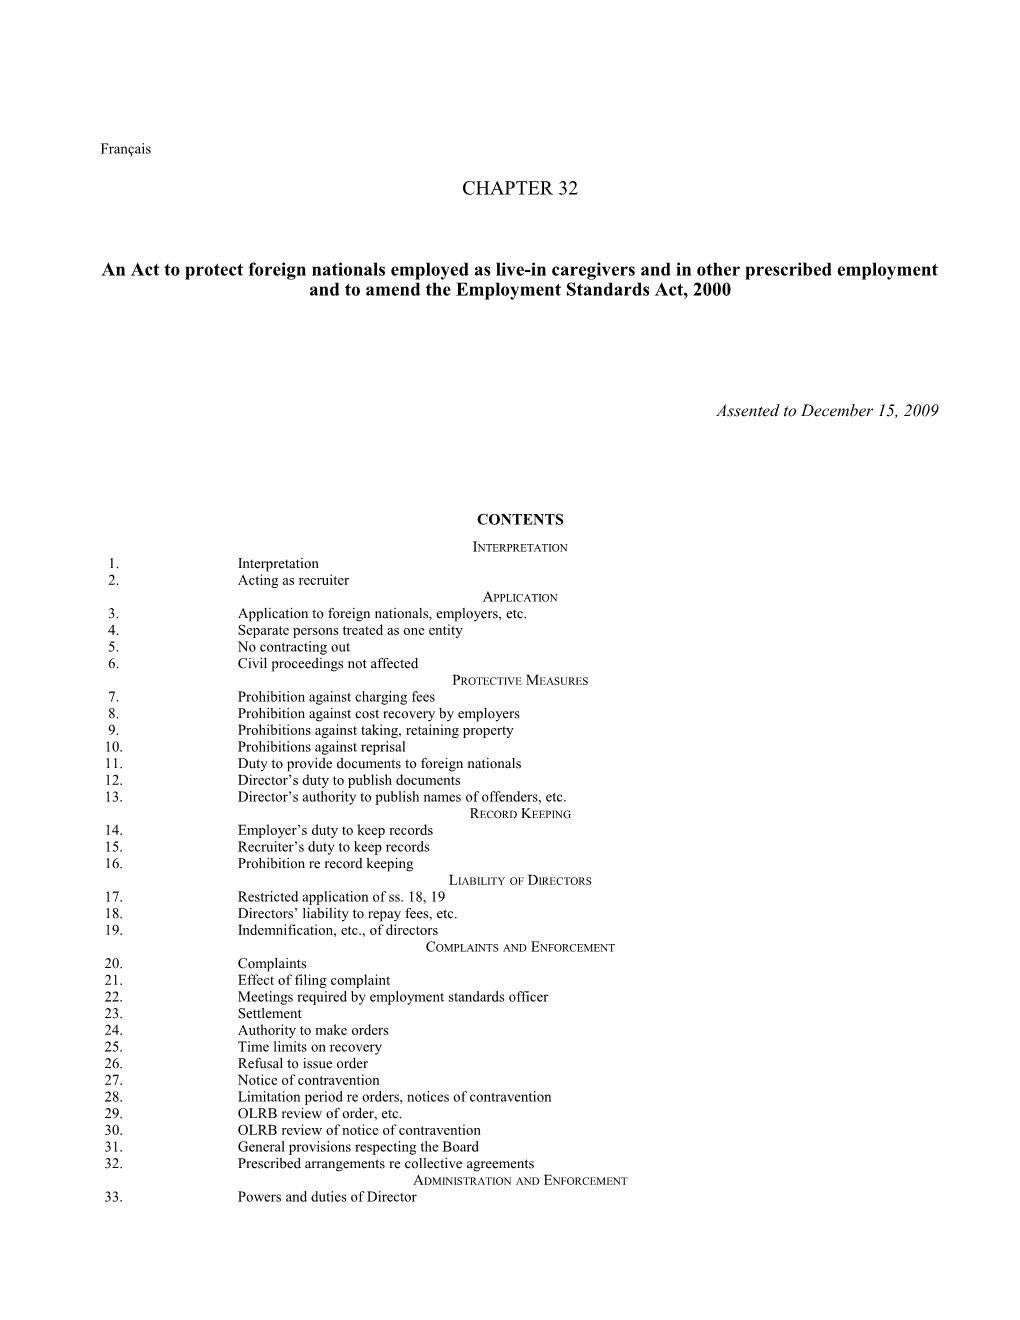 Employment Protection for Foreign Nationals Act (Live-In Caregivers and Others), 2009